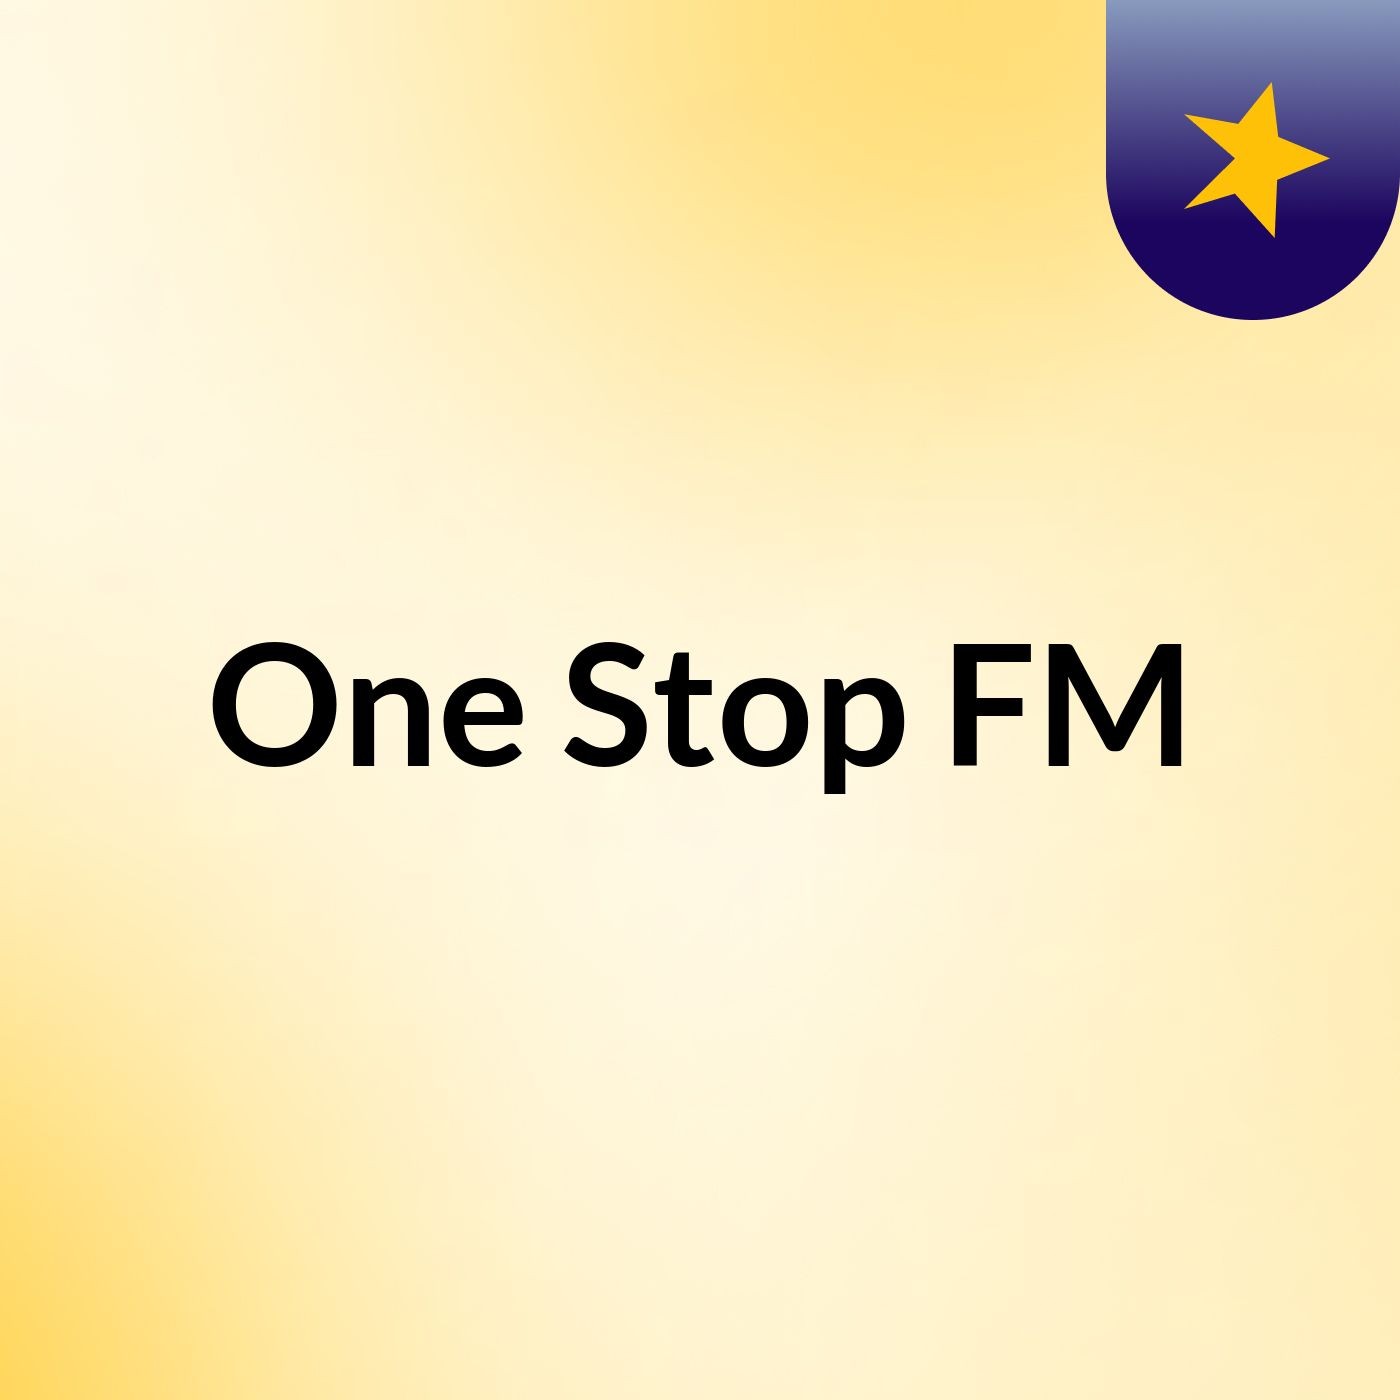 One Stop FM